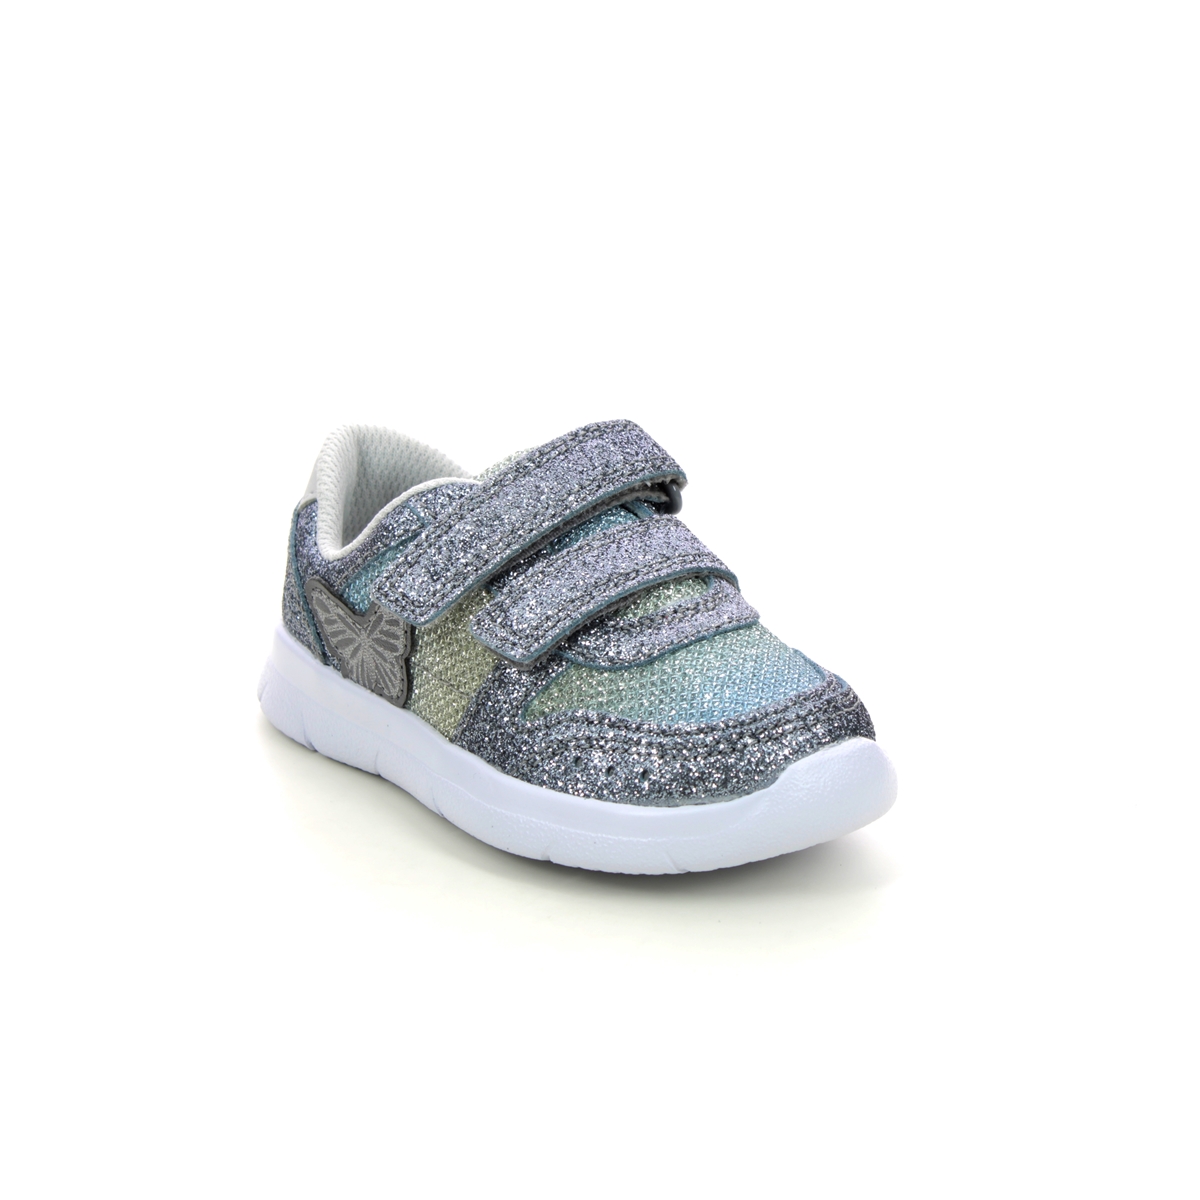 Clarks Ath Wing T Metallic Kids Toddler Girls Trainers 623197G In Size 9.5 In Plain Metallic G Width Fitting For kids